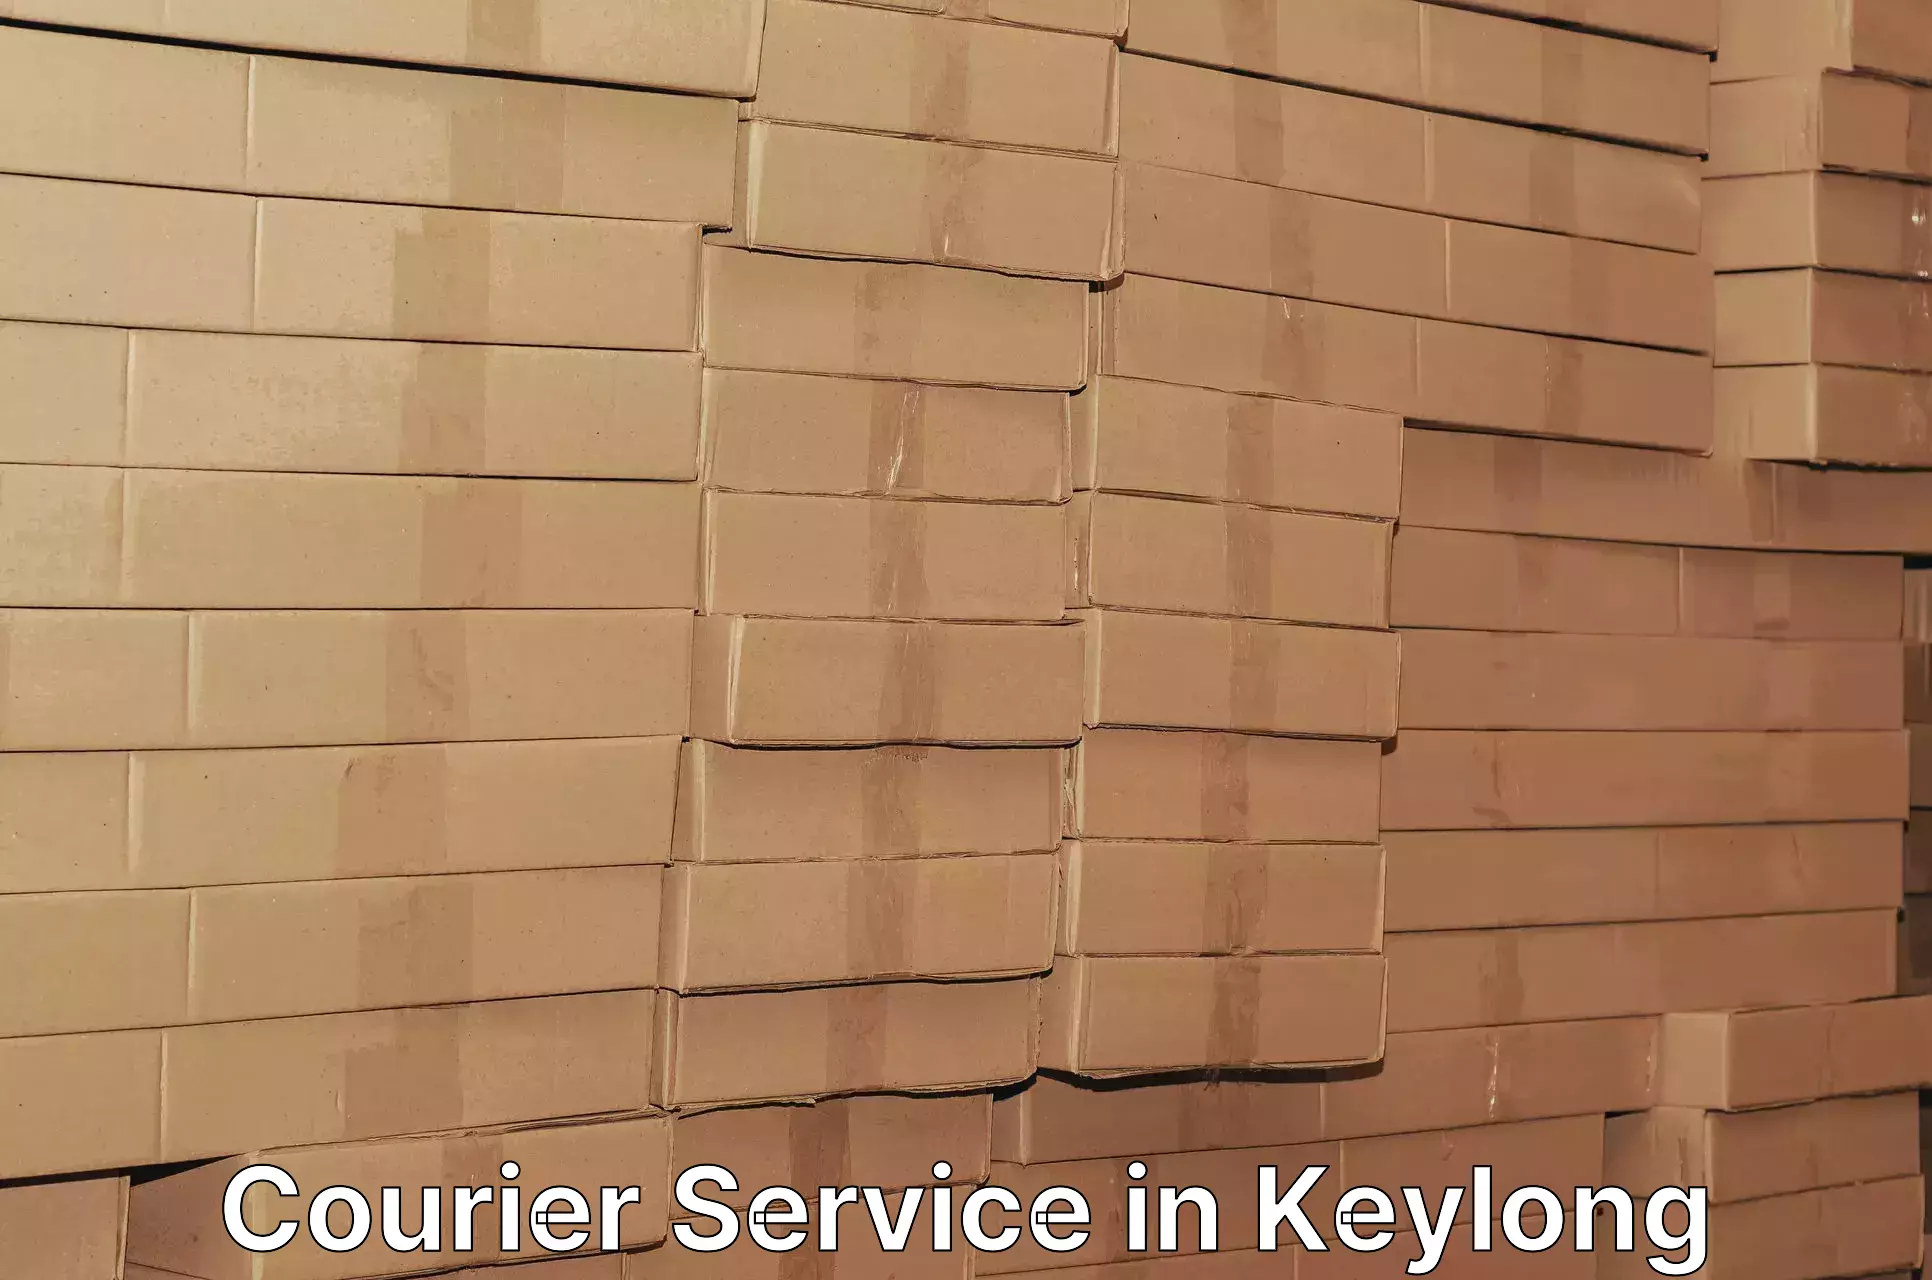 Individual parcel service in Keylong